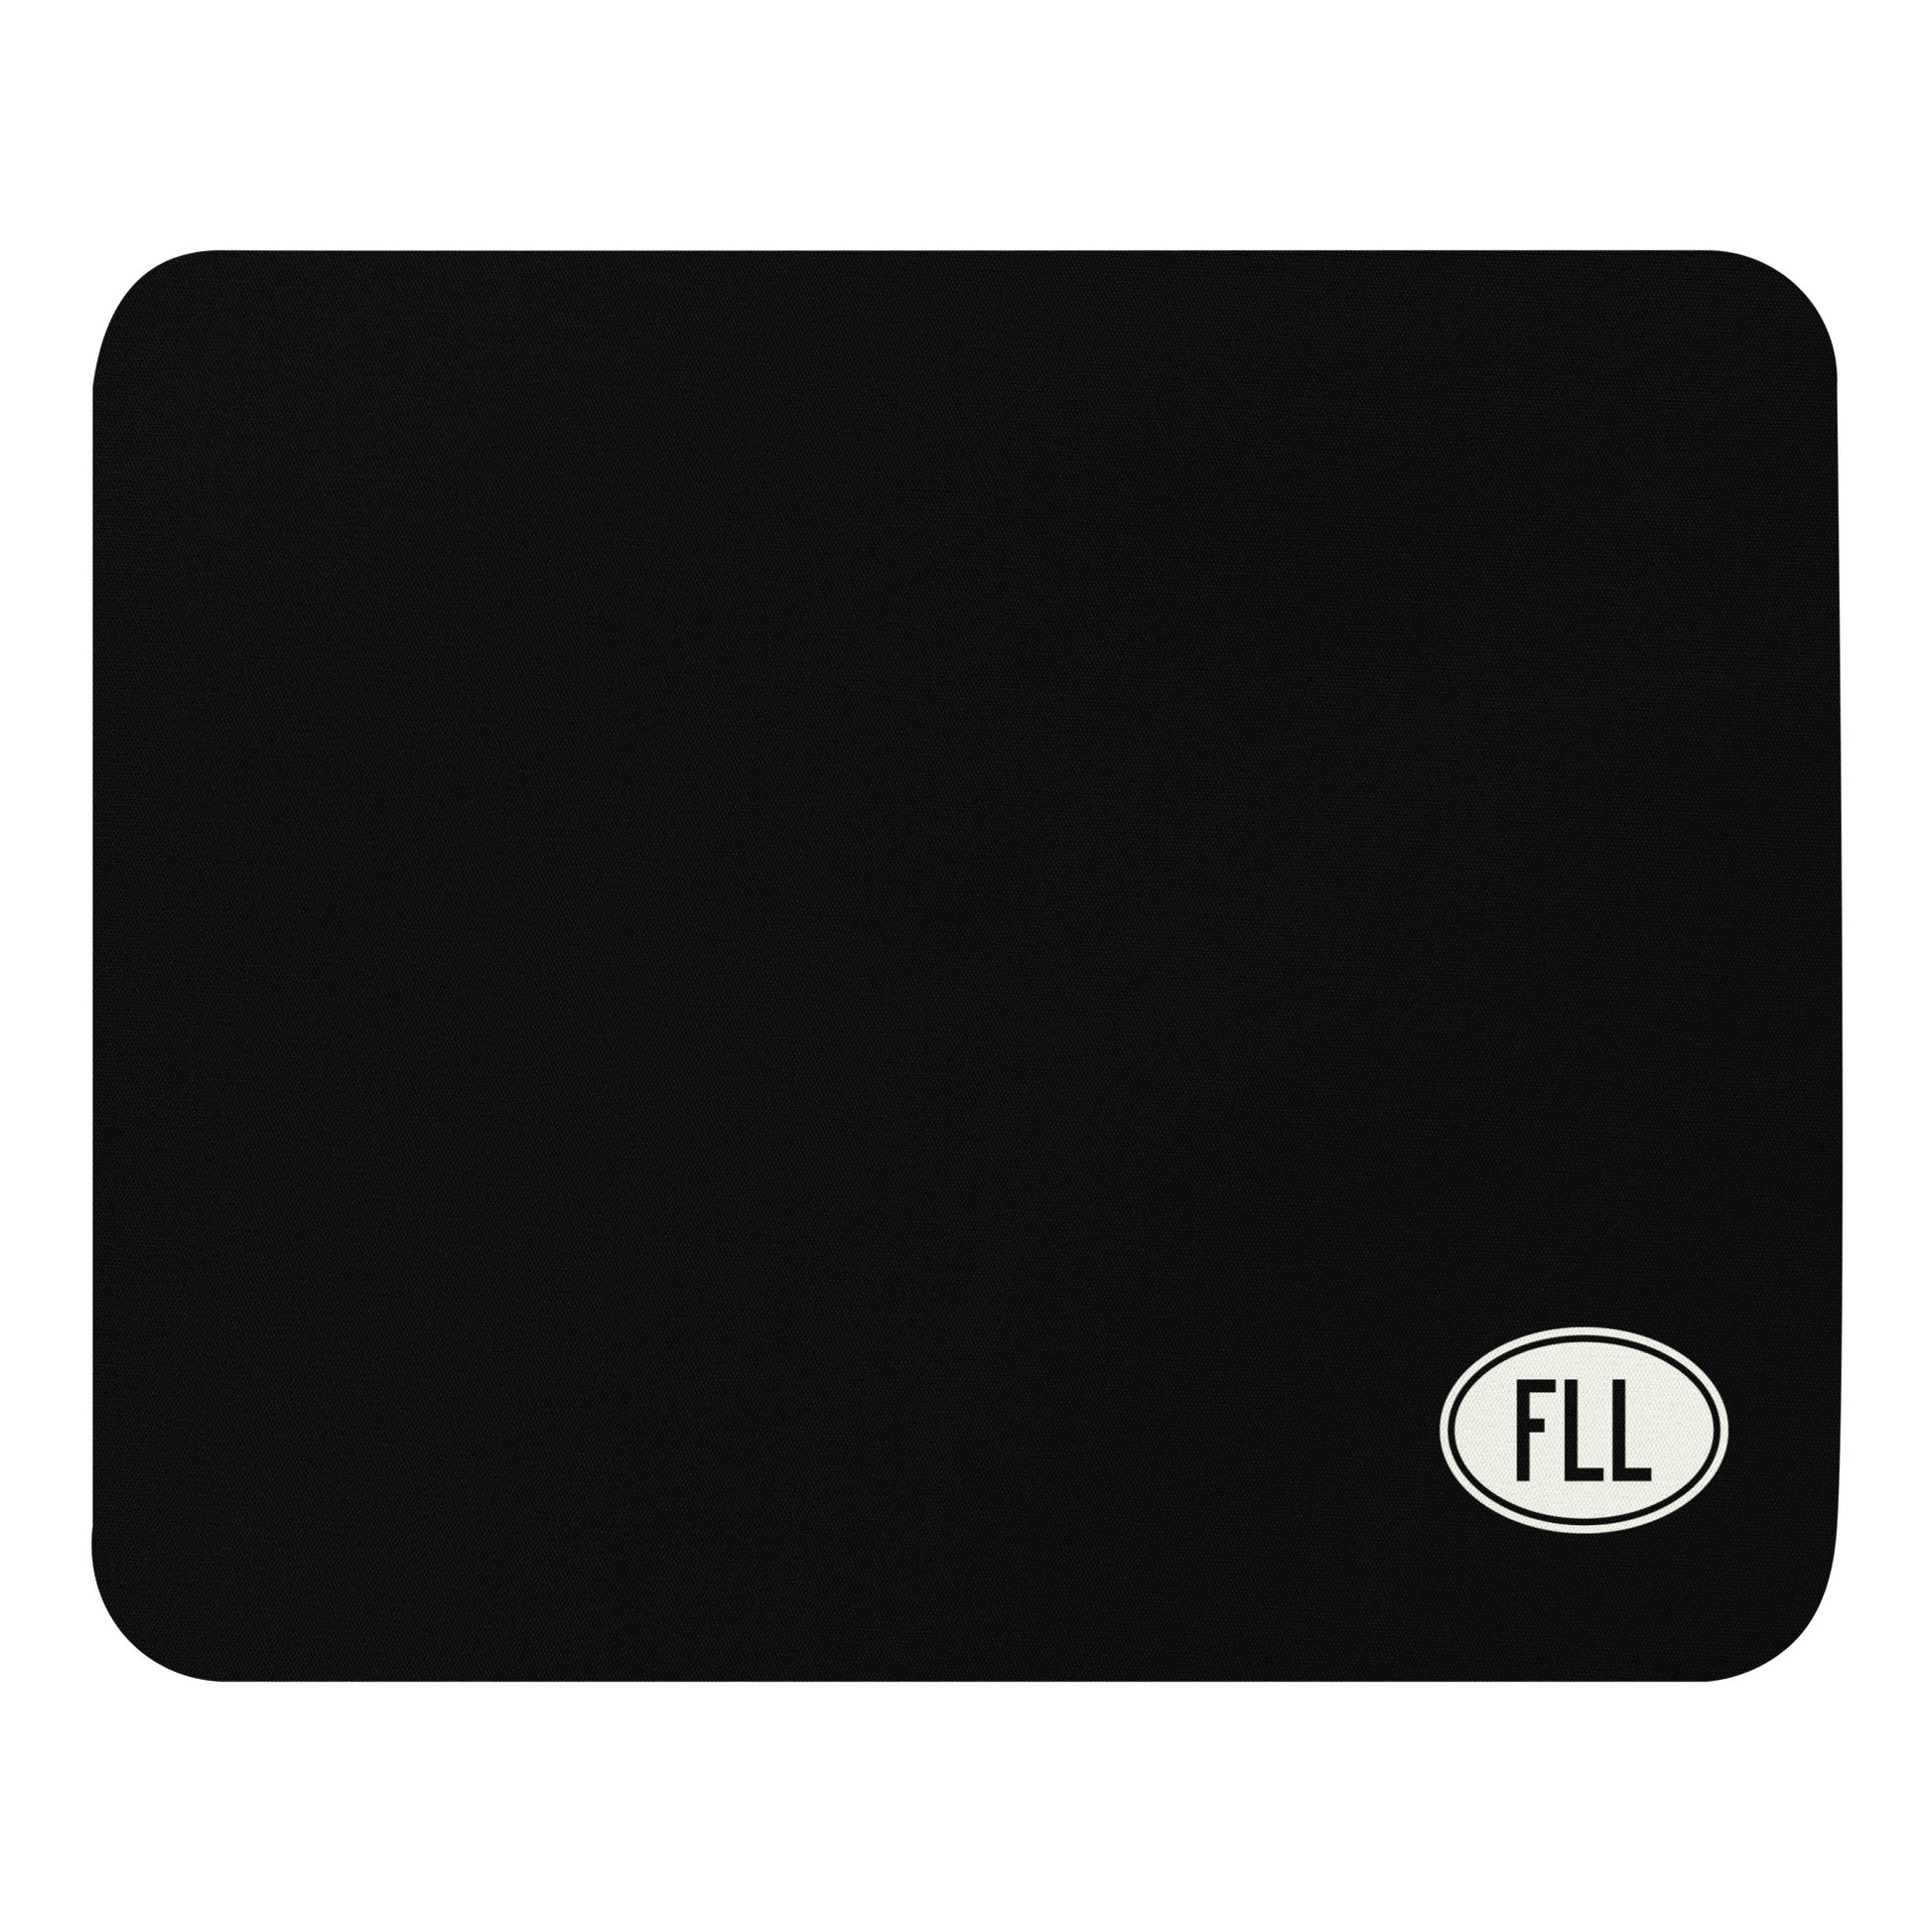 Unique Travel Gift Mouse Pad - White Oval • FLL Fort Lauderdale • YHM Designs - Image 01